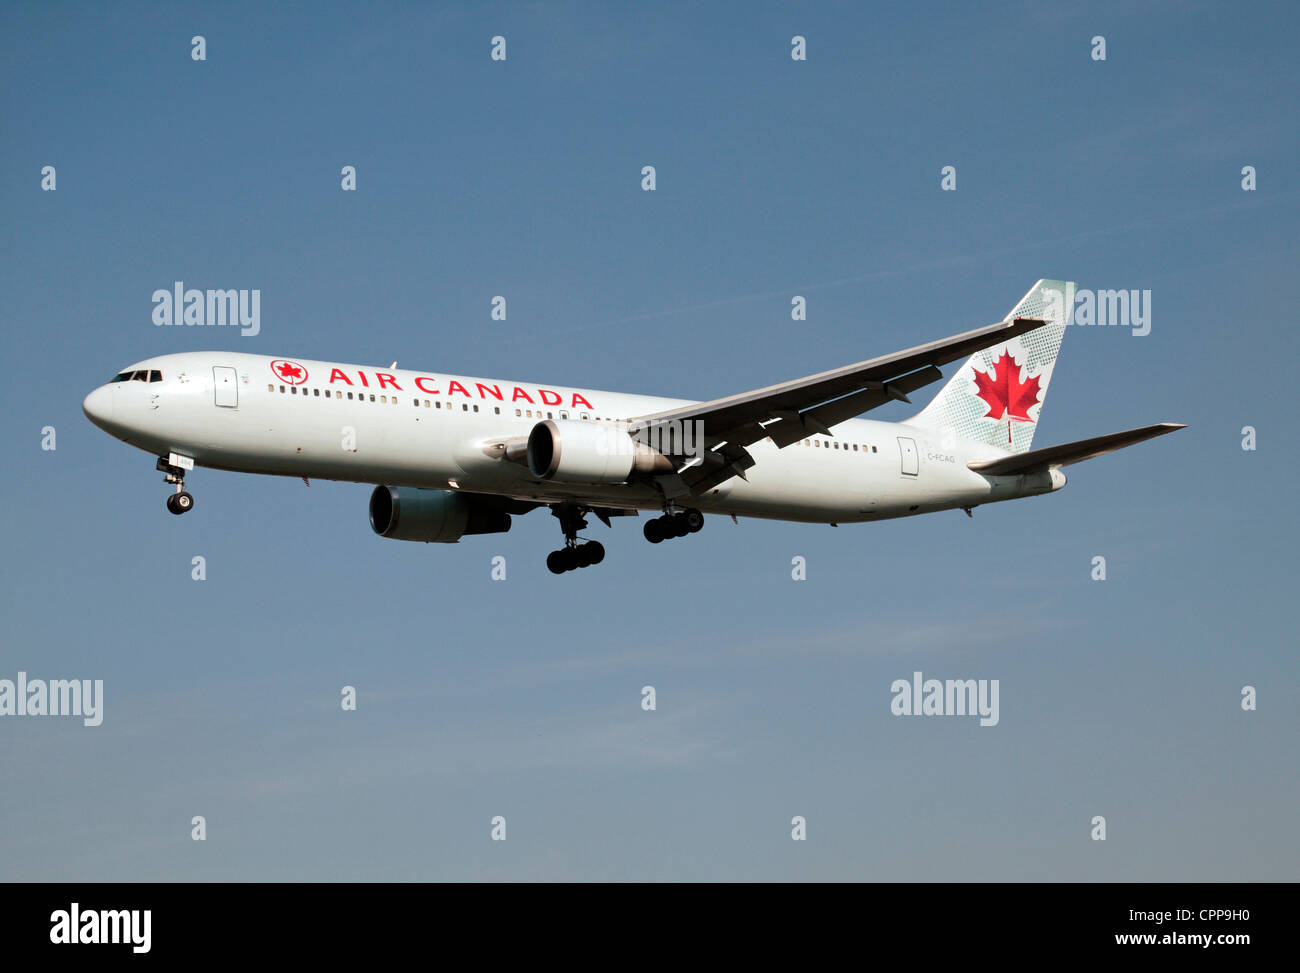 The Air Canada Boeing 767-375/ER (C-FCAG)  about to land at Heathrow Airport, London, UK. Feb 2012 Stock Photo